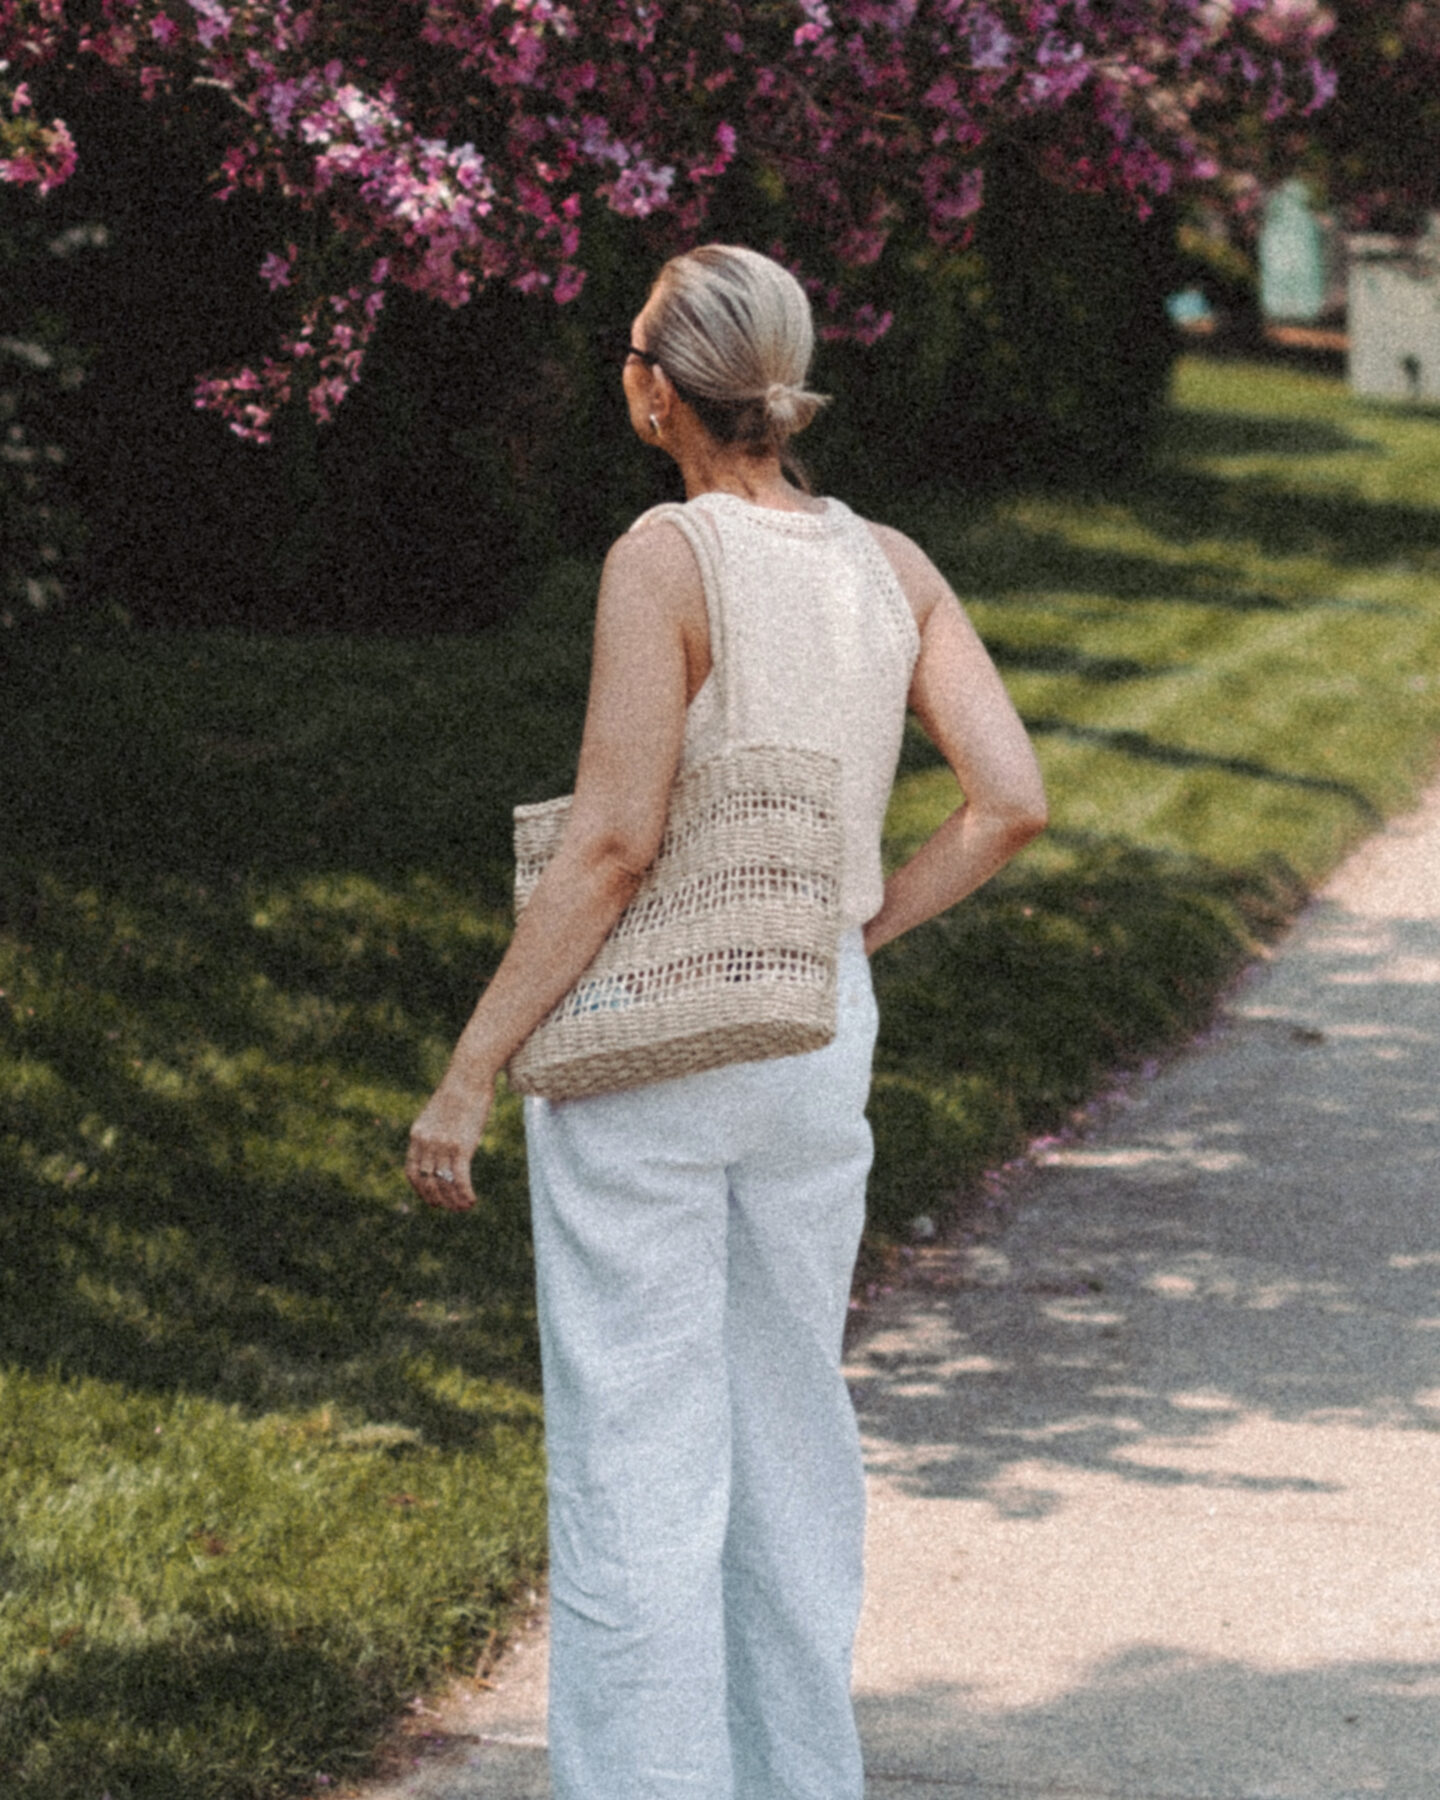 Karin Emily wears a cream sweater tank and white linen pair of pants while walking in front of a row of lilac bushes